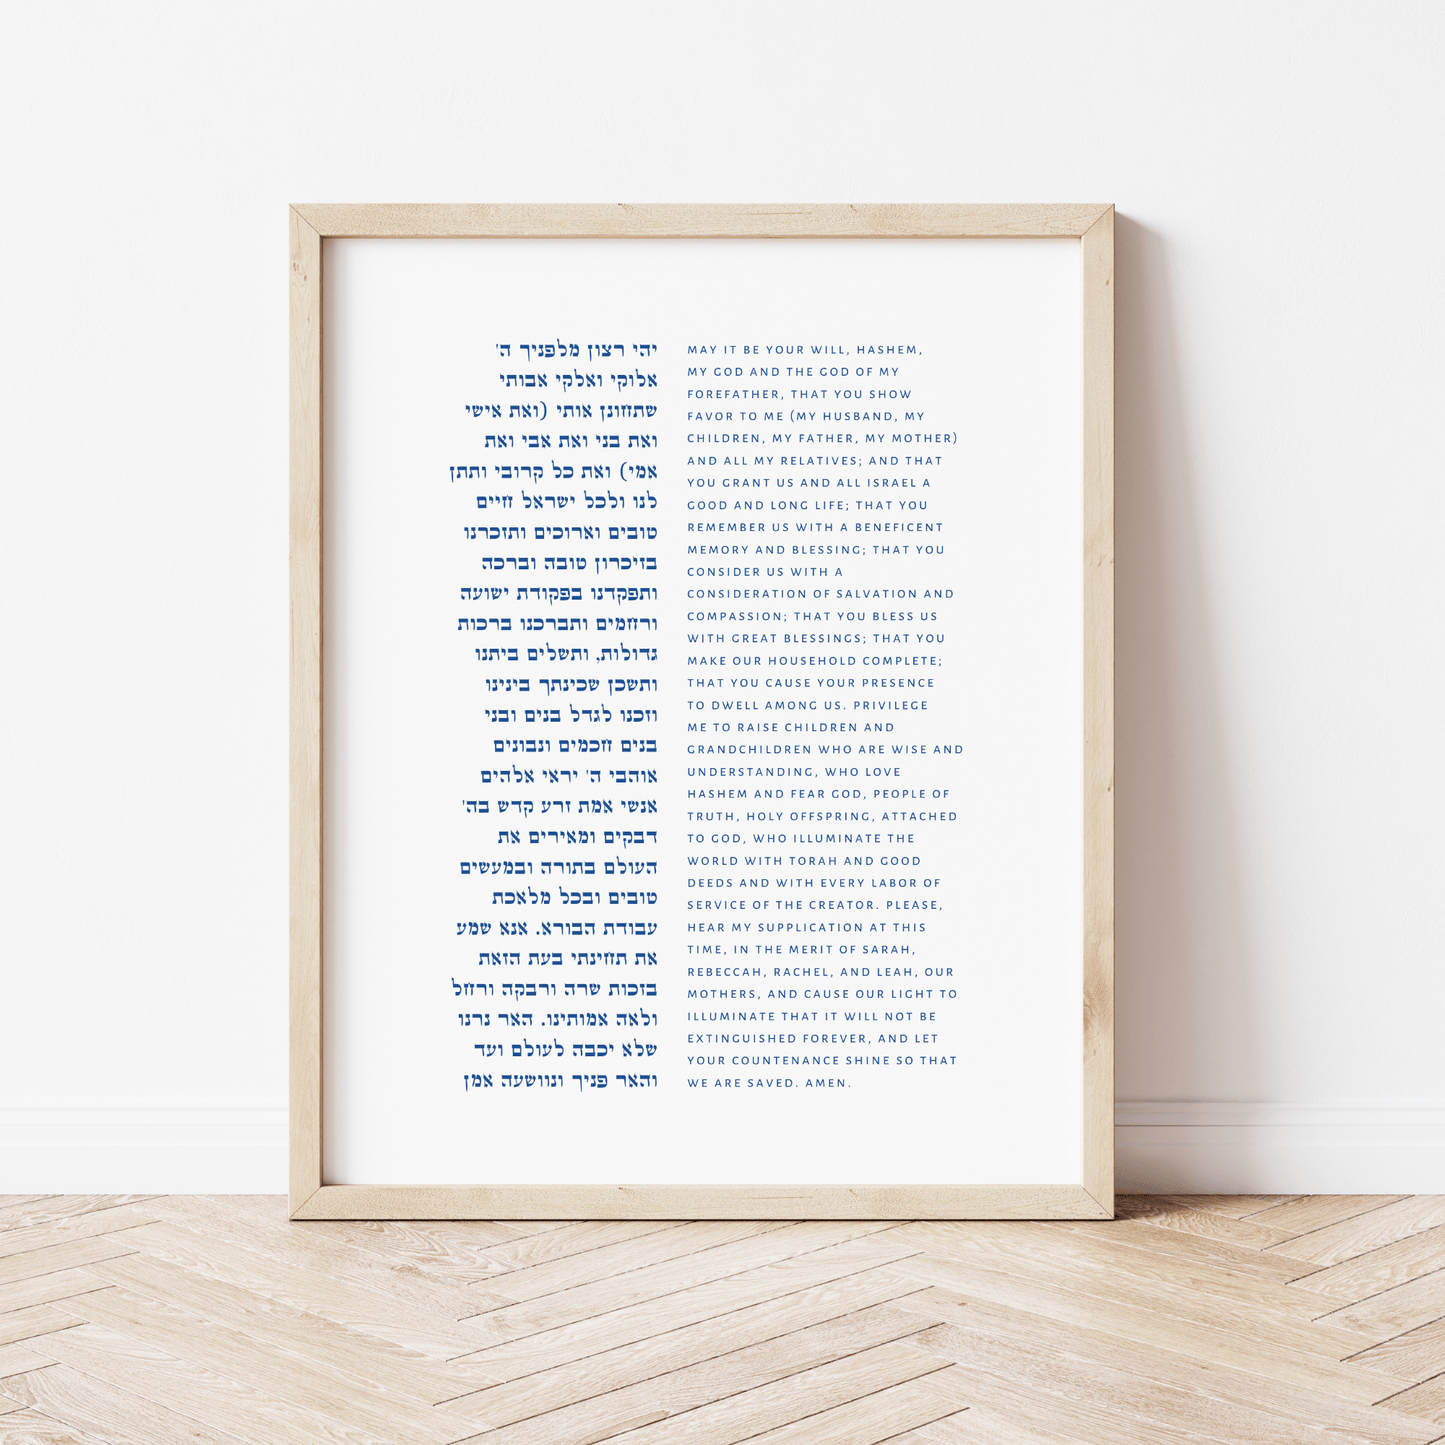 The Verse The Shabbat Candles Blessing Bundle Shabbat Candles Blessing Bundle | Jewish Art & Gifts